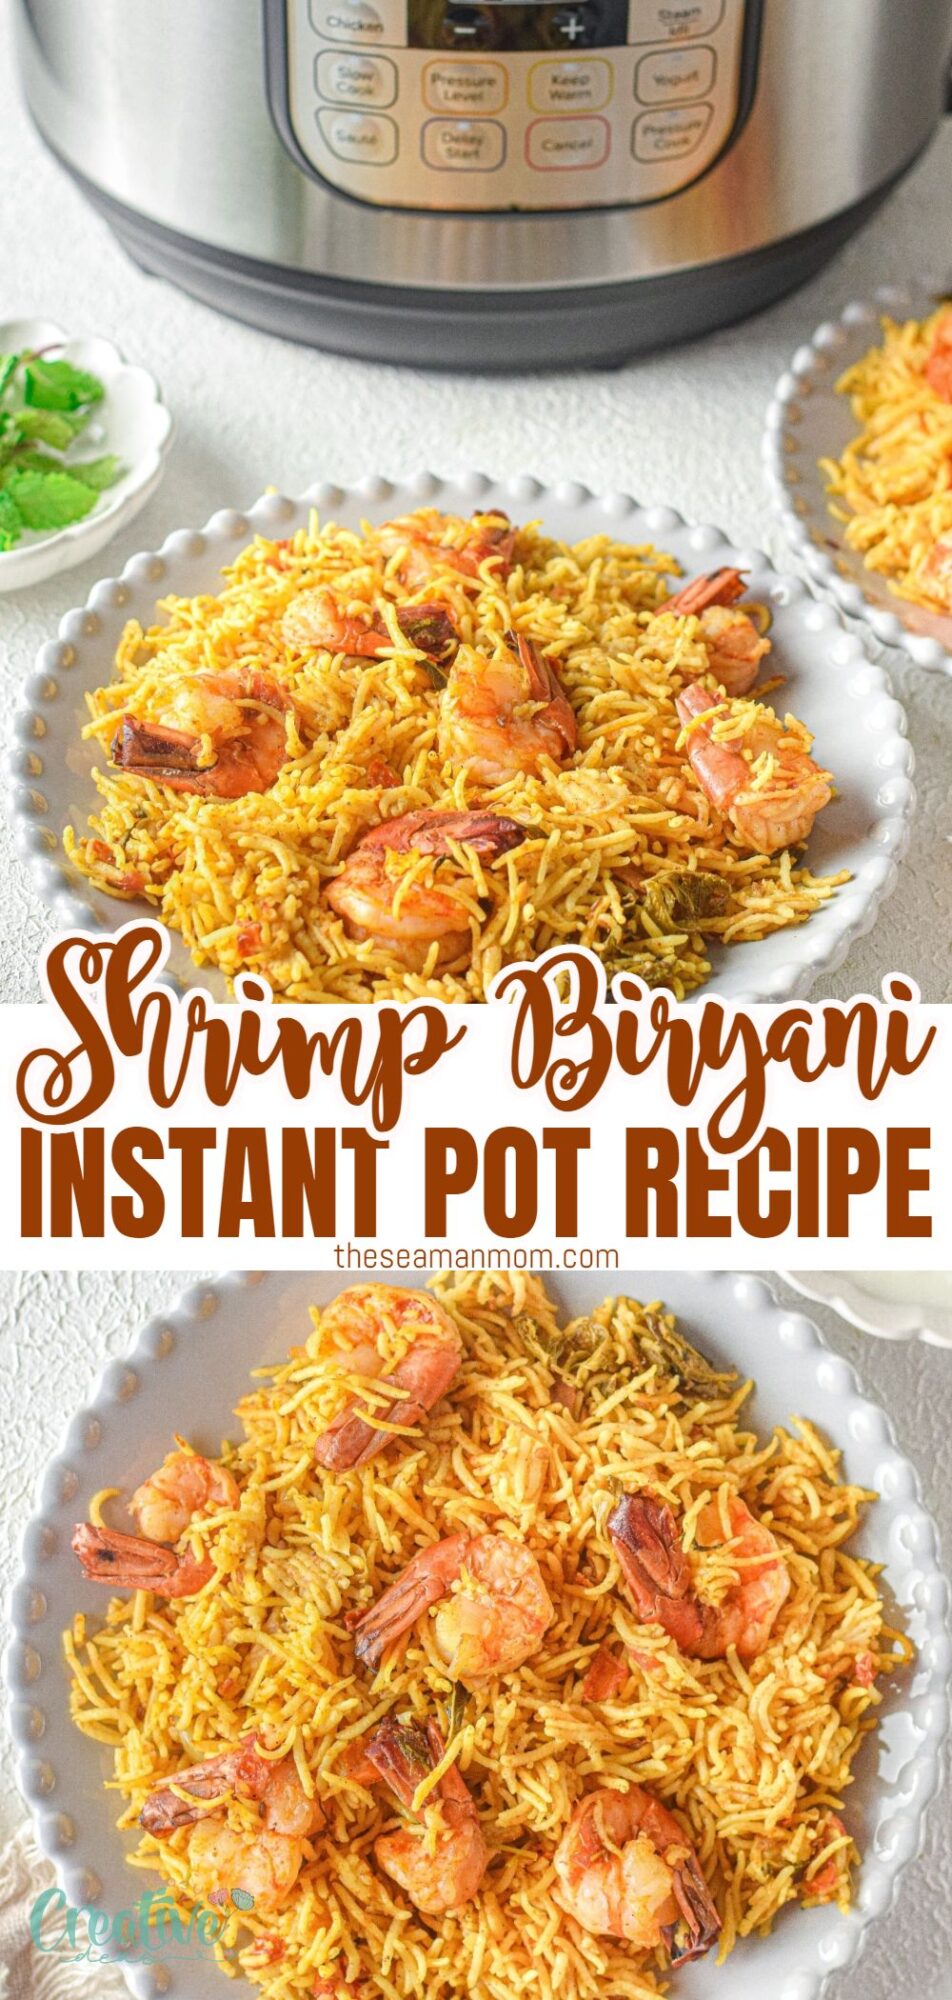 A mouthwatering shrimp biryani recipe cooked effortlessly in an instant pot. Perfectly spiced and full of flavor!